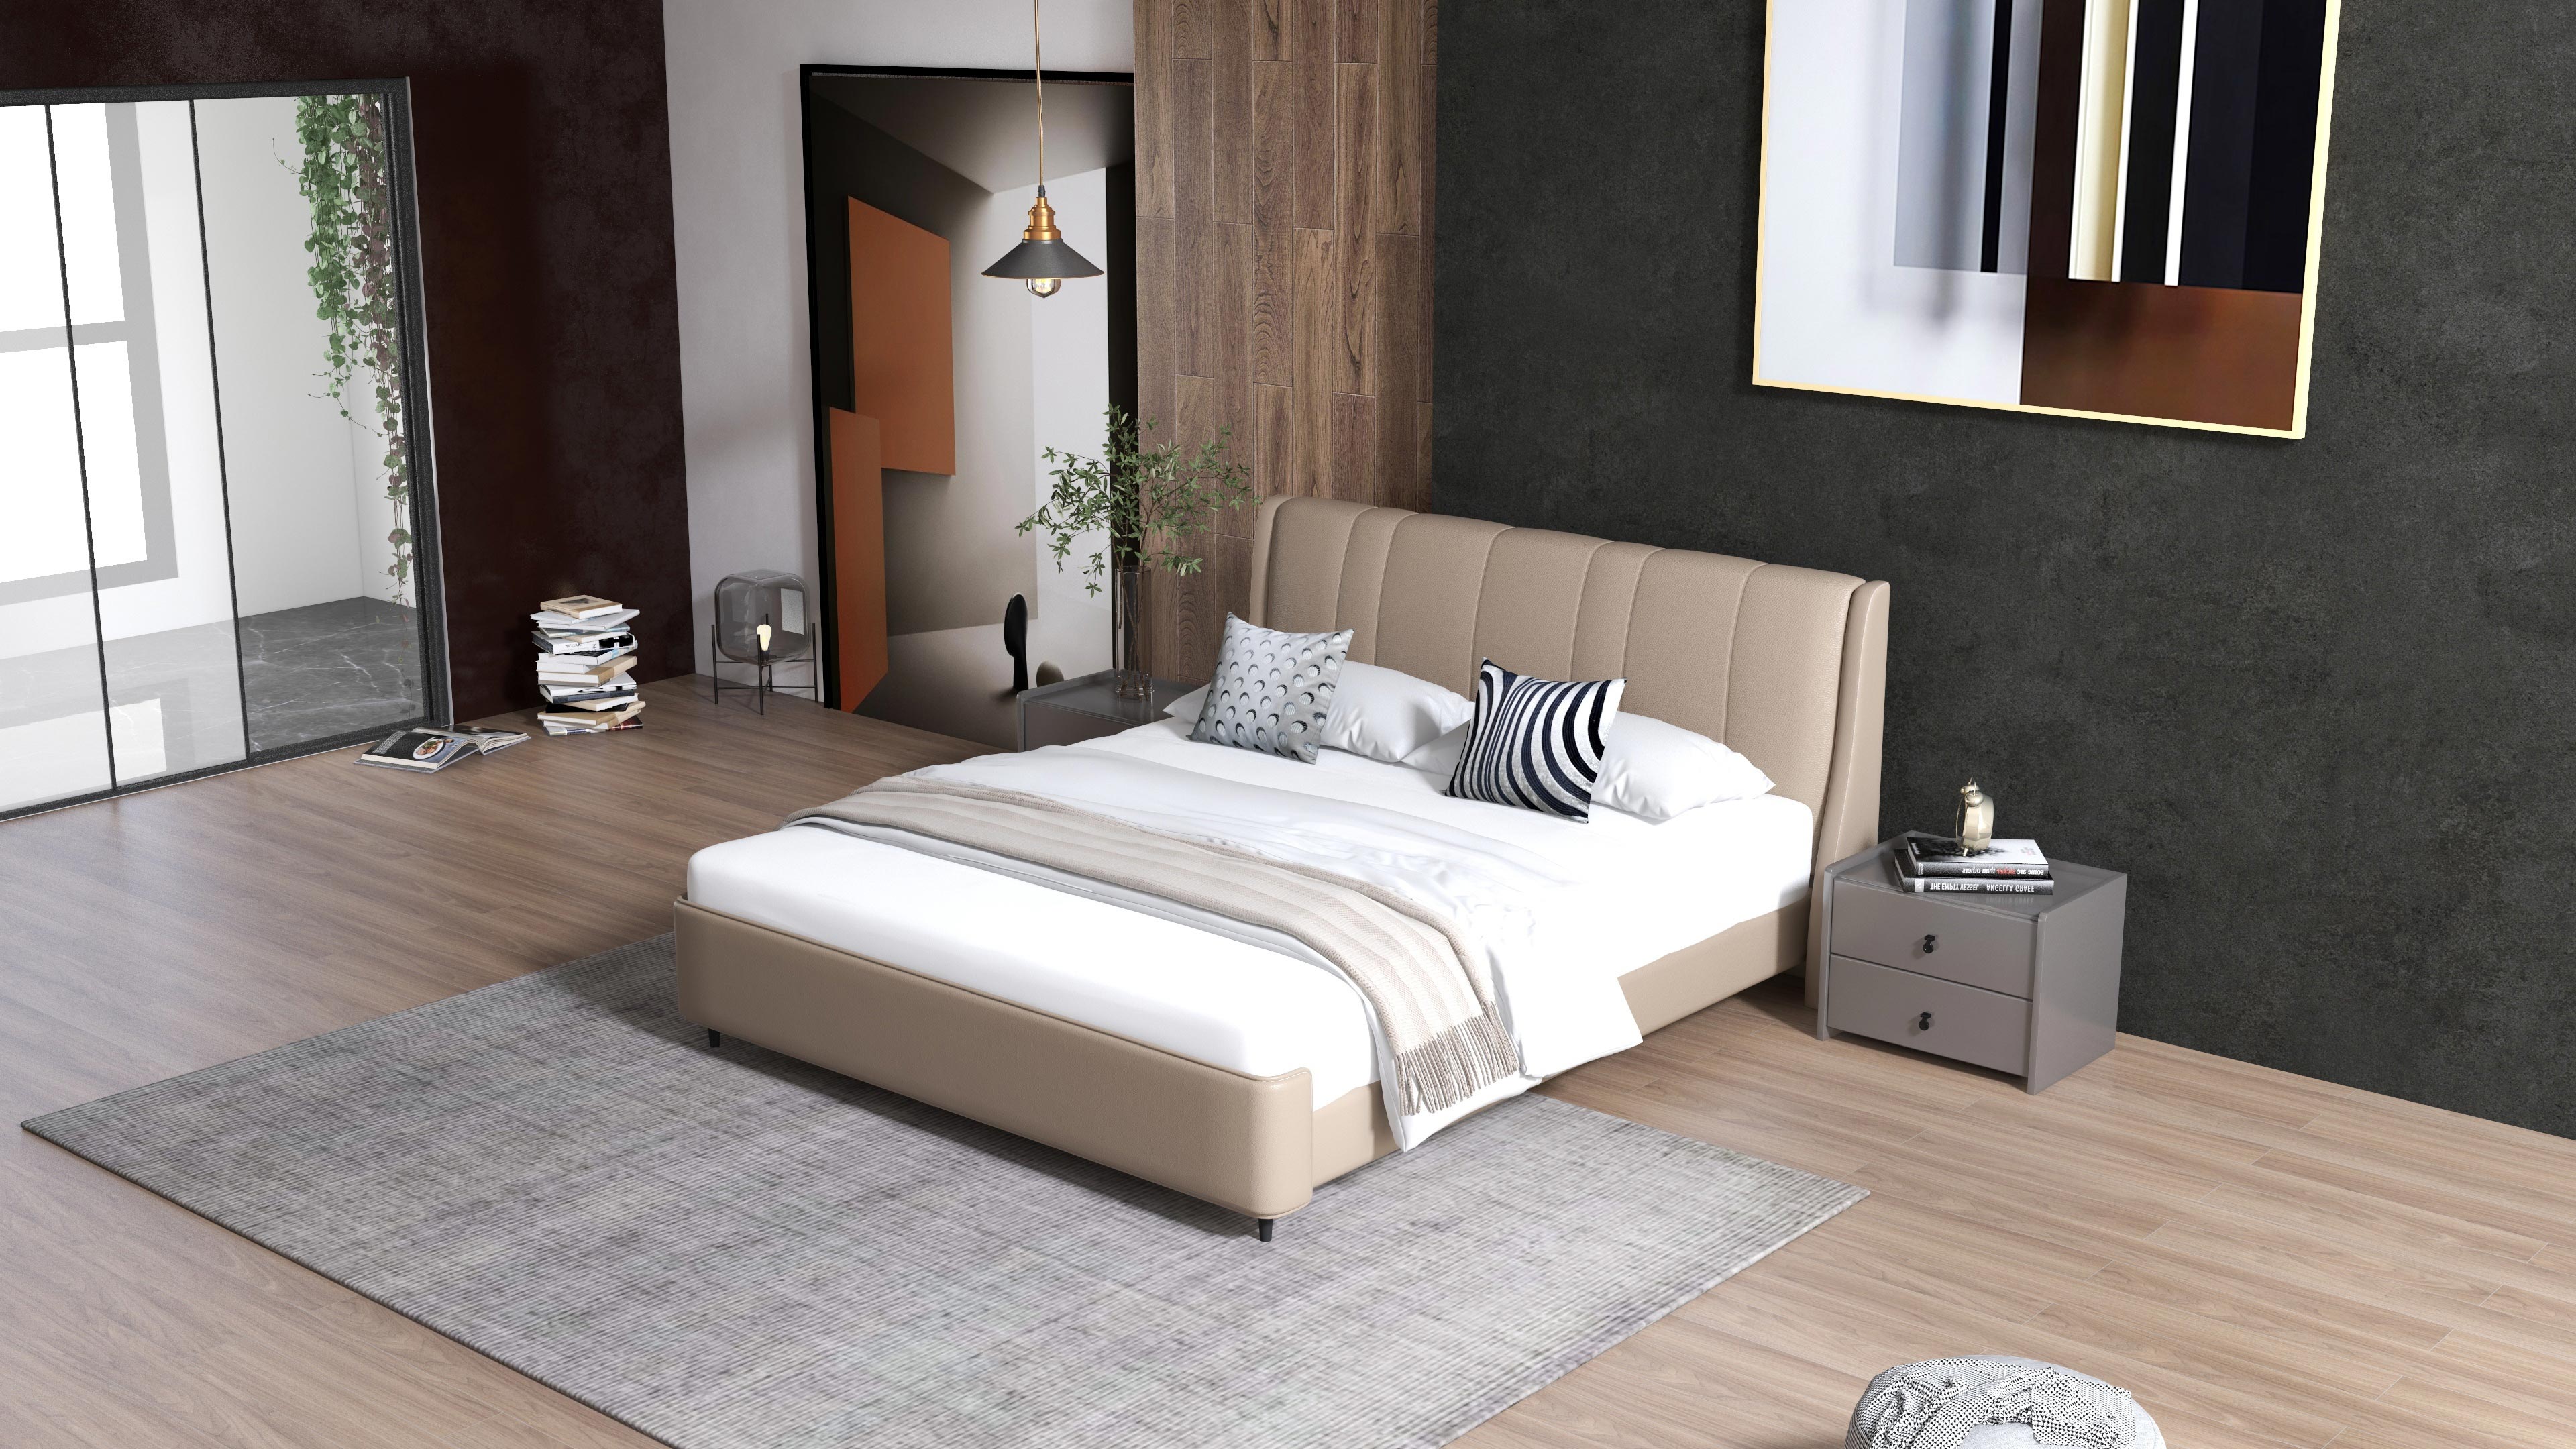 <p><strong>description：</strong></p><p>*bedframe with the 3D slats or motion</p><p>*upholstered in full top grain;</p><p>*the headrest can support your neck and waist perfectly&nbsp;</p><p>*Well matched the mattress and bedding.</p><p><br/></p>